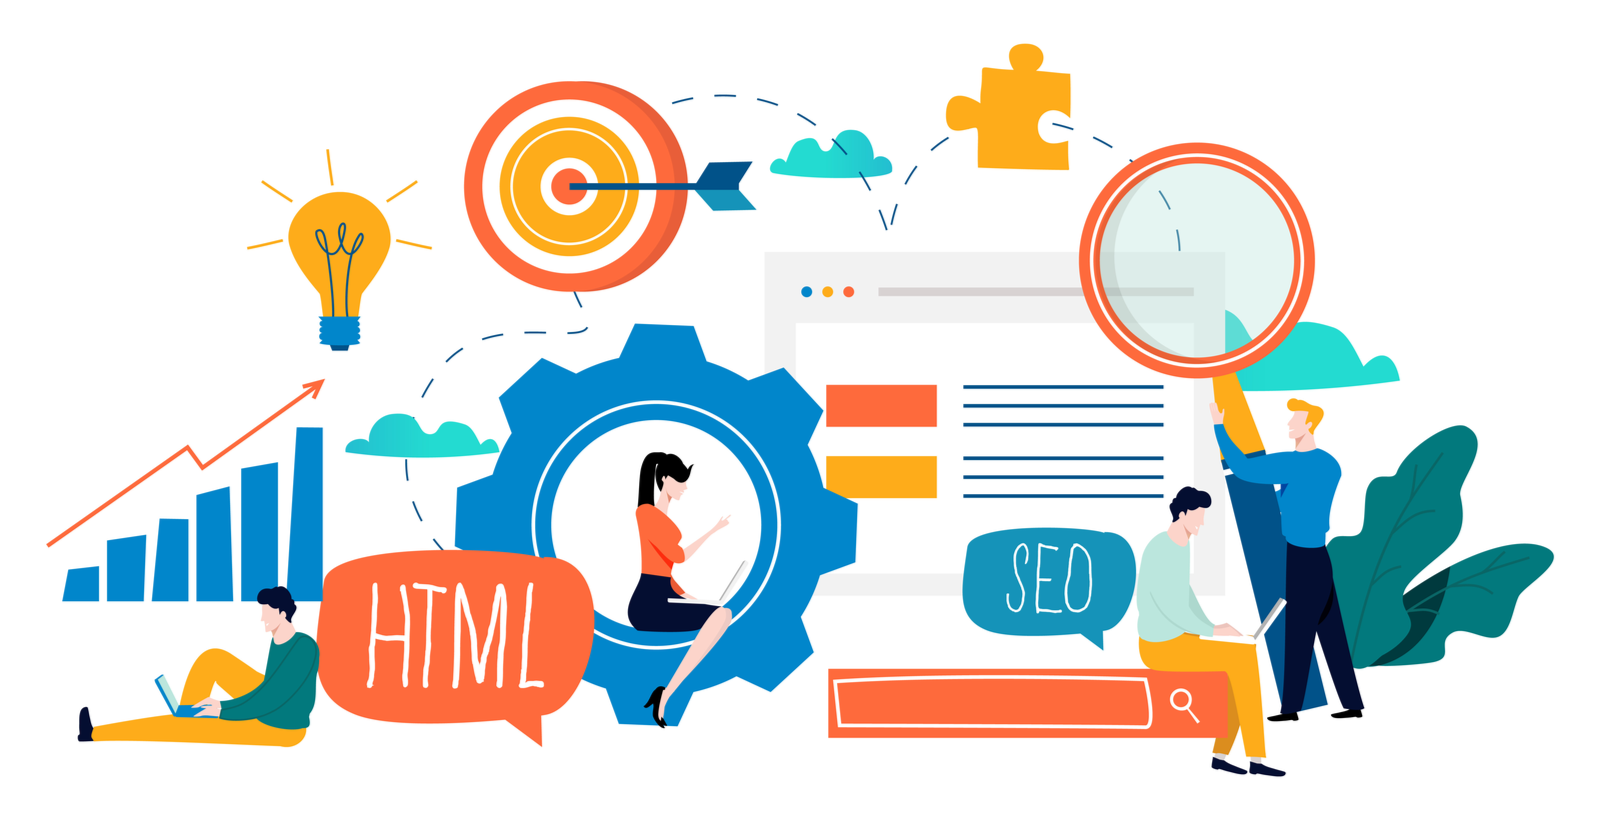 Ask an SEO: 3 HTML & Coding Questions Answered